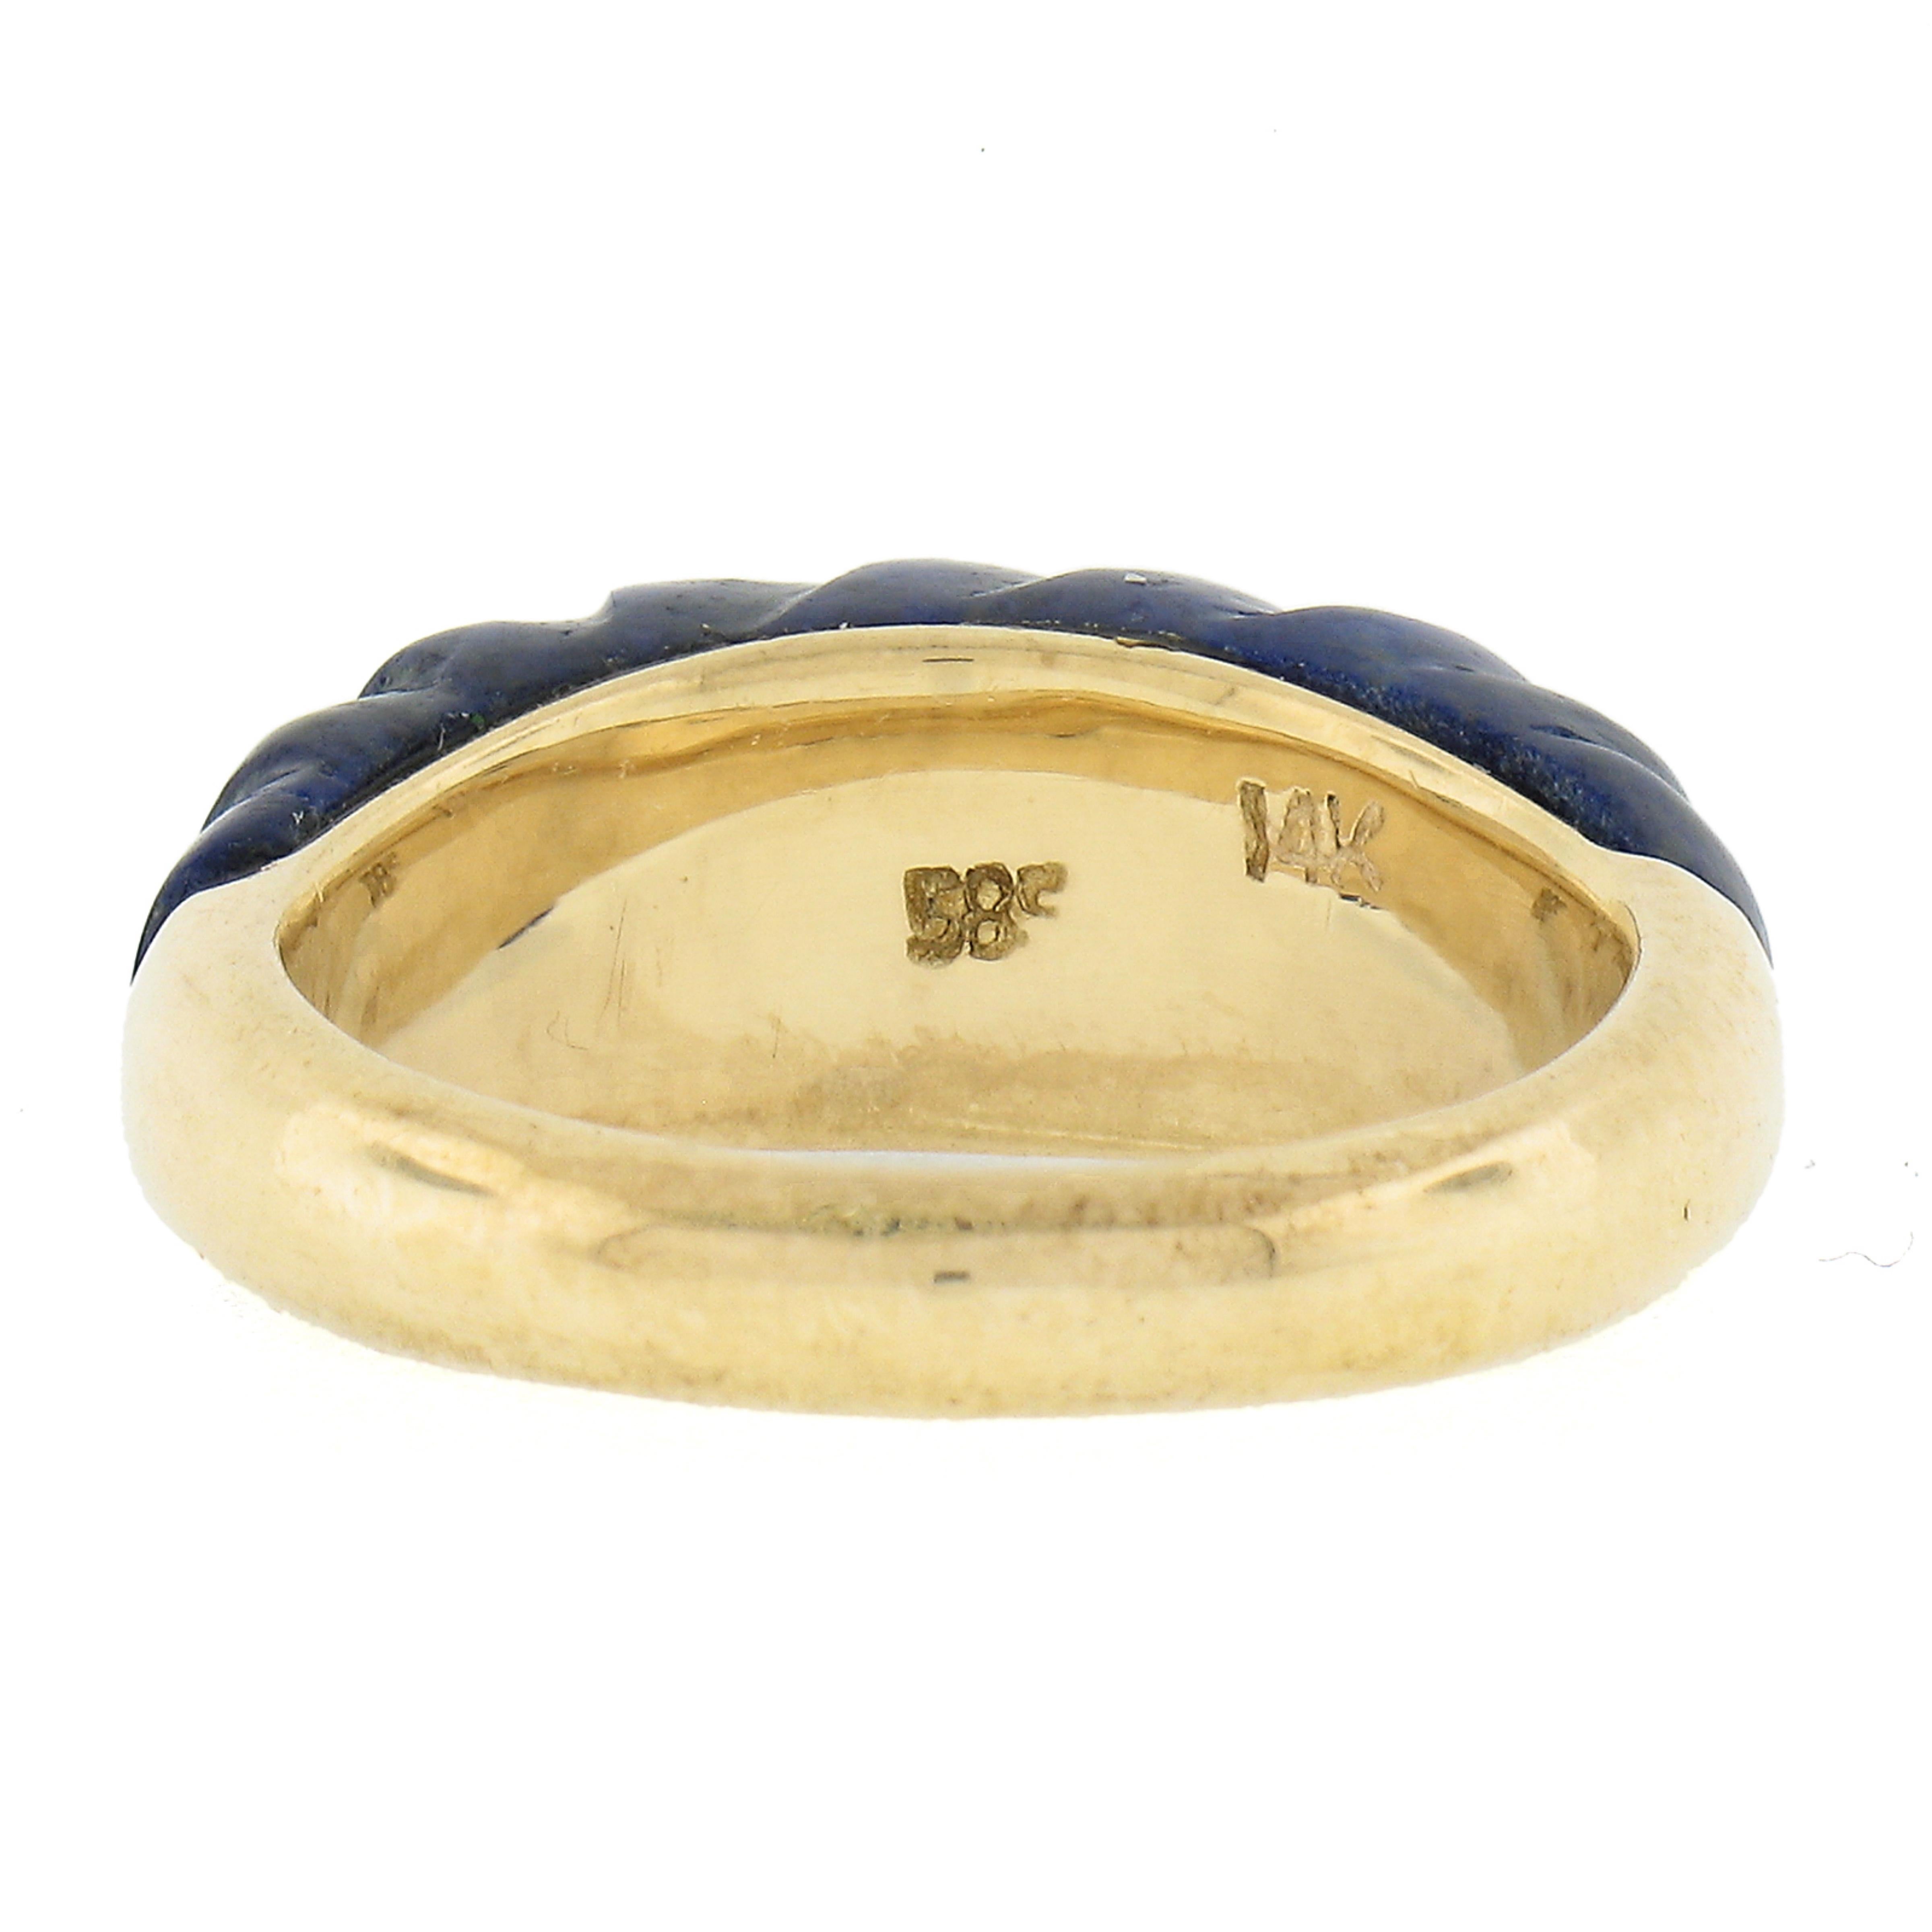 Solid 14k Yellow Gold Inlaid Carved Lapis High Dome Bombe Band Ring Size 5.5 For Sale 1